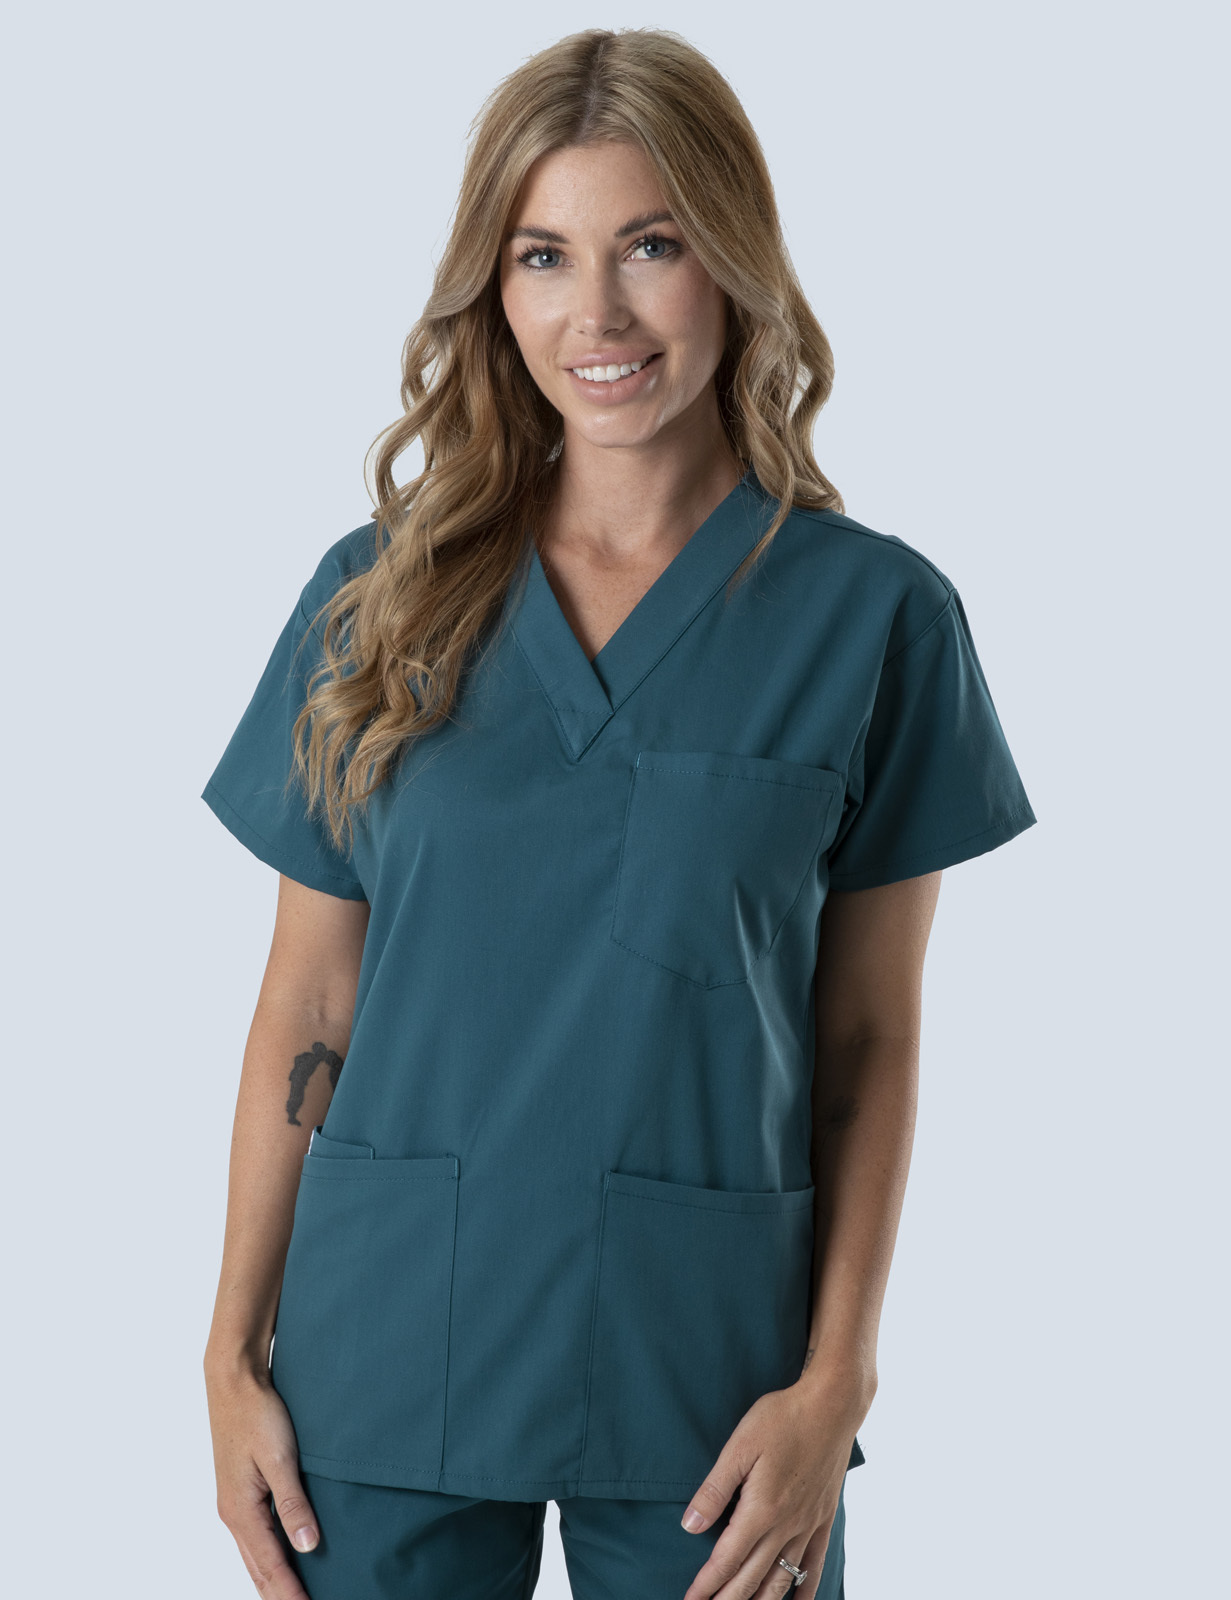 UQ Vets Gatton Anaesthesia Uniform Top Only Bundle (4 Pocket Top in Caribbean incl Logos)